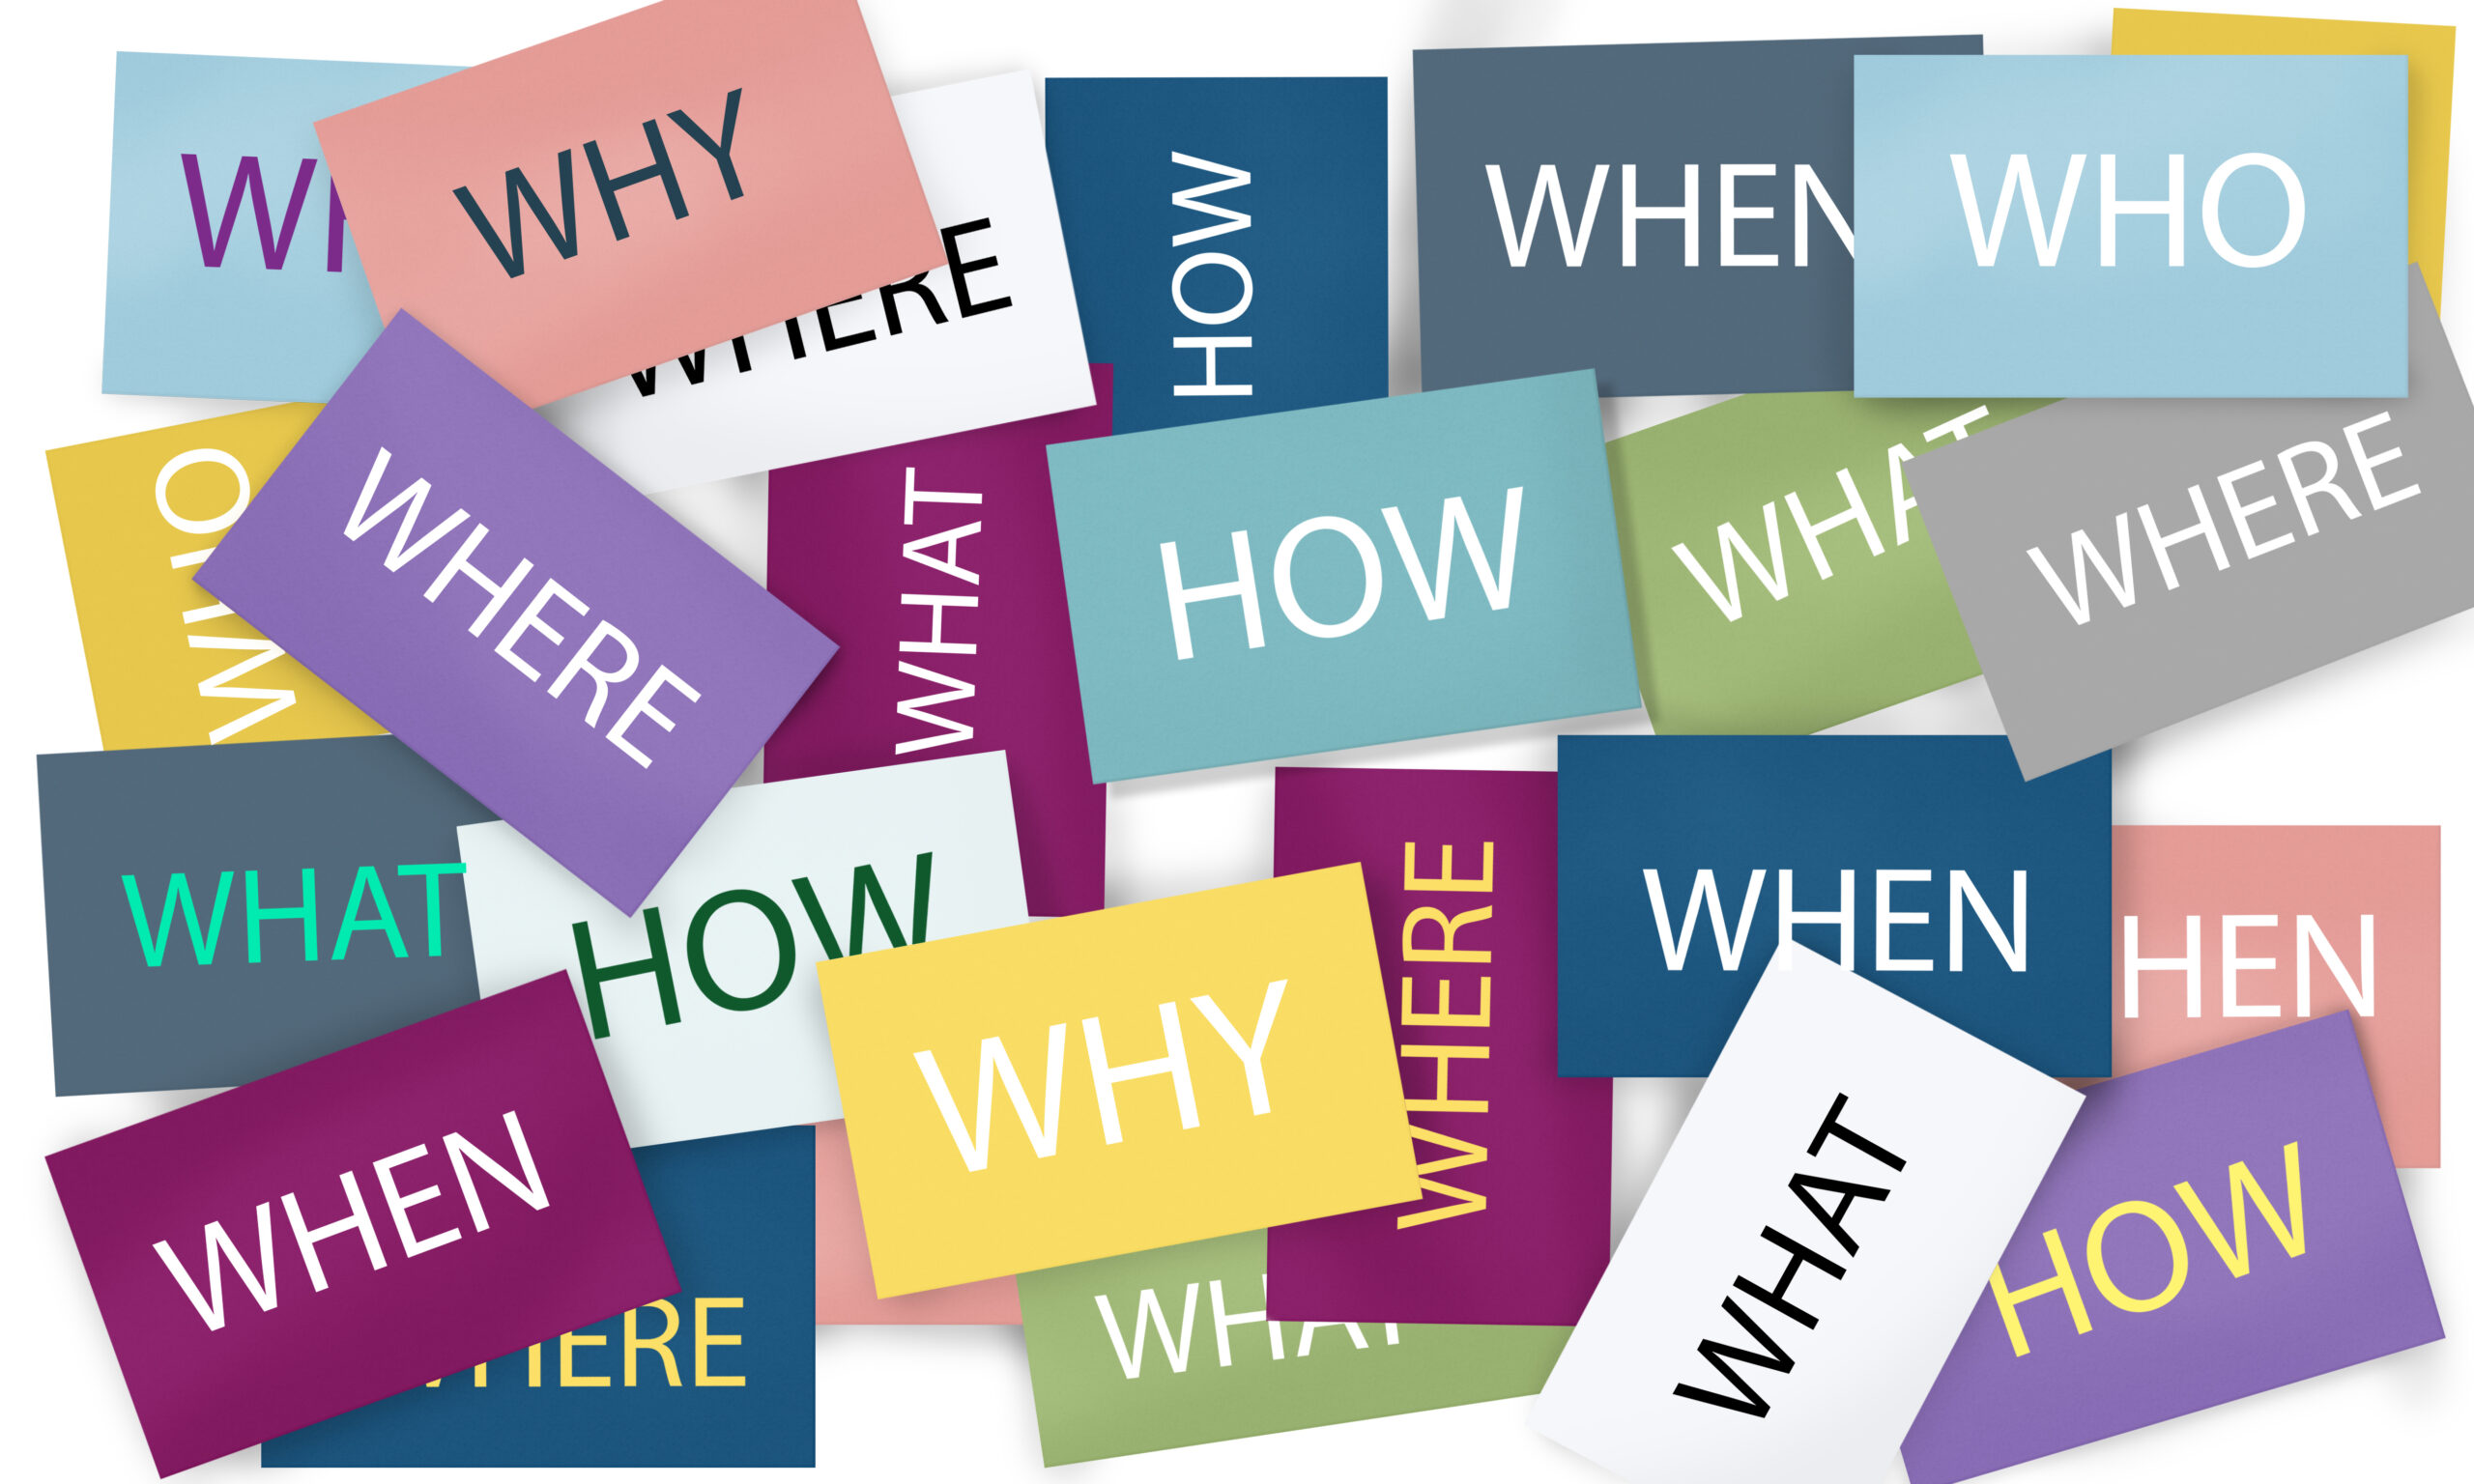 Image of who, what, where, when, how, and why representing asking the right questions.